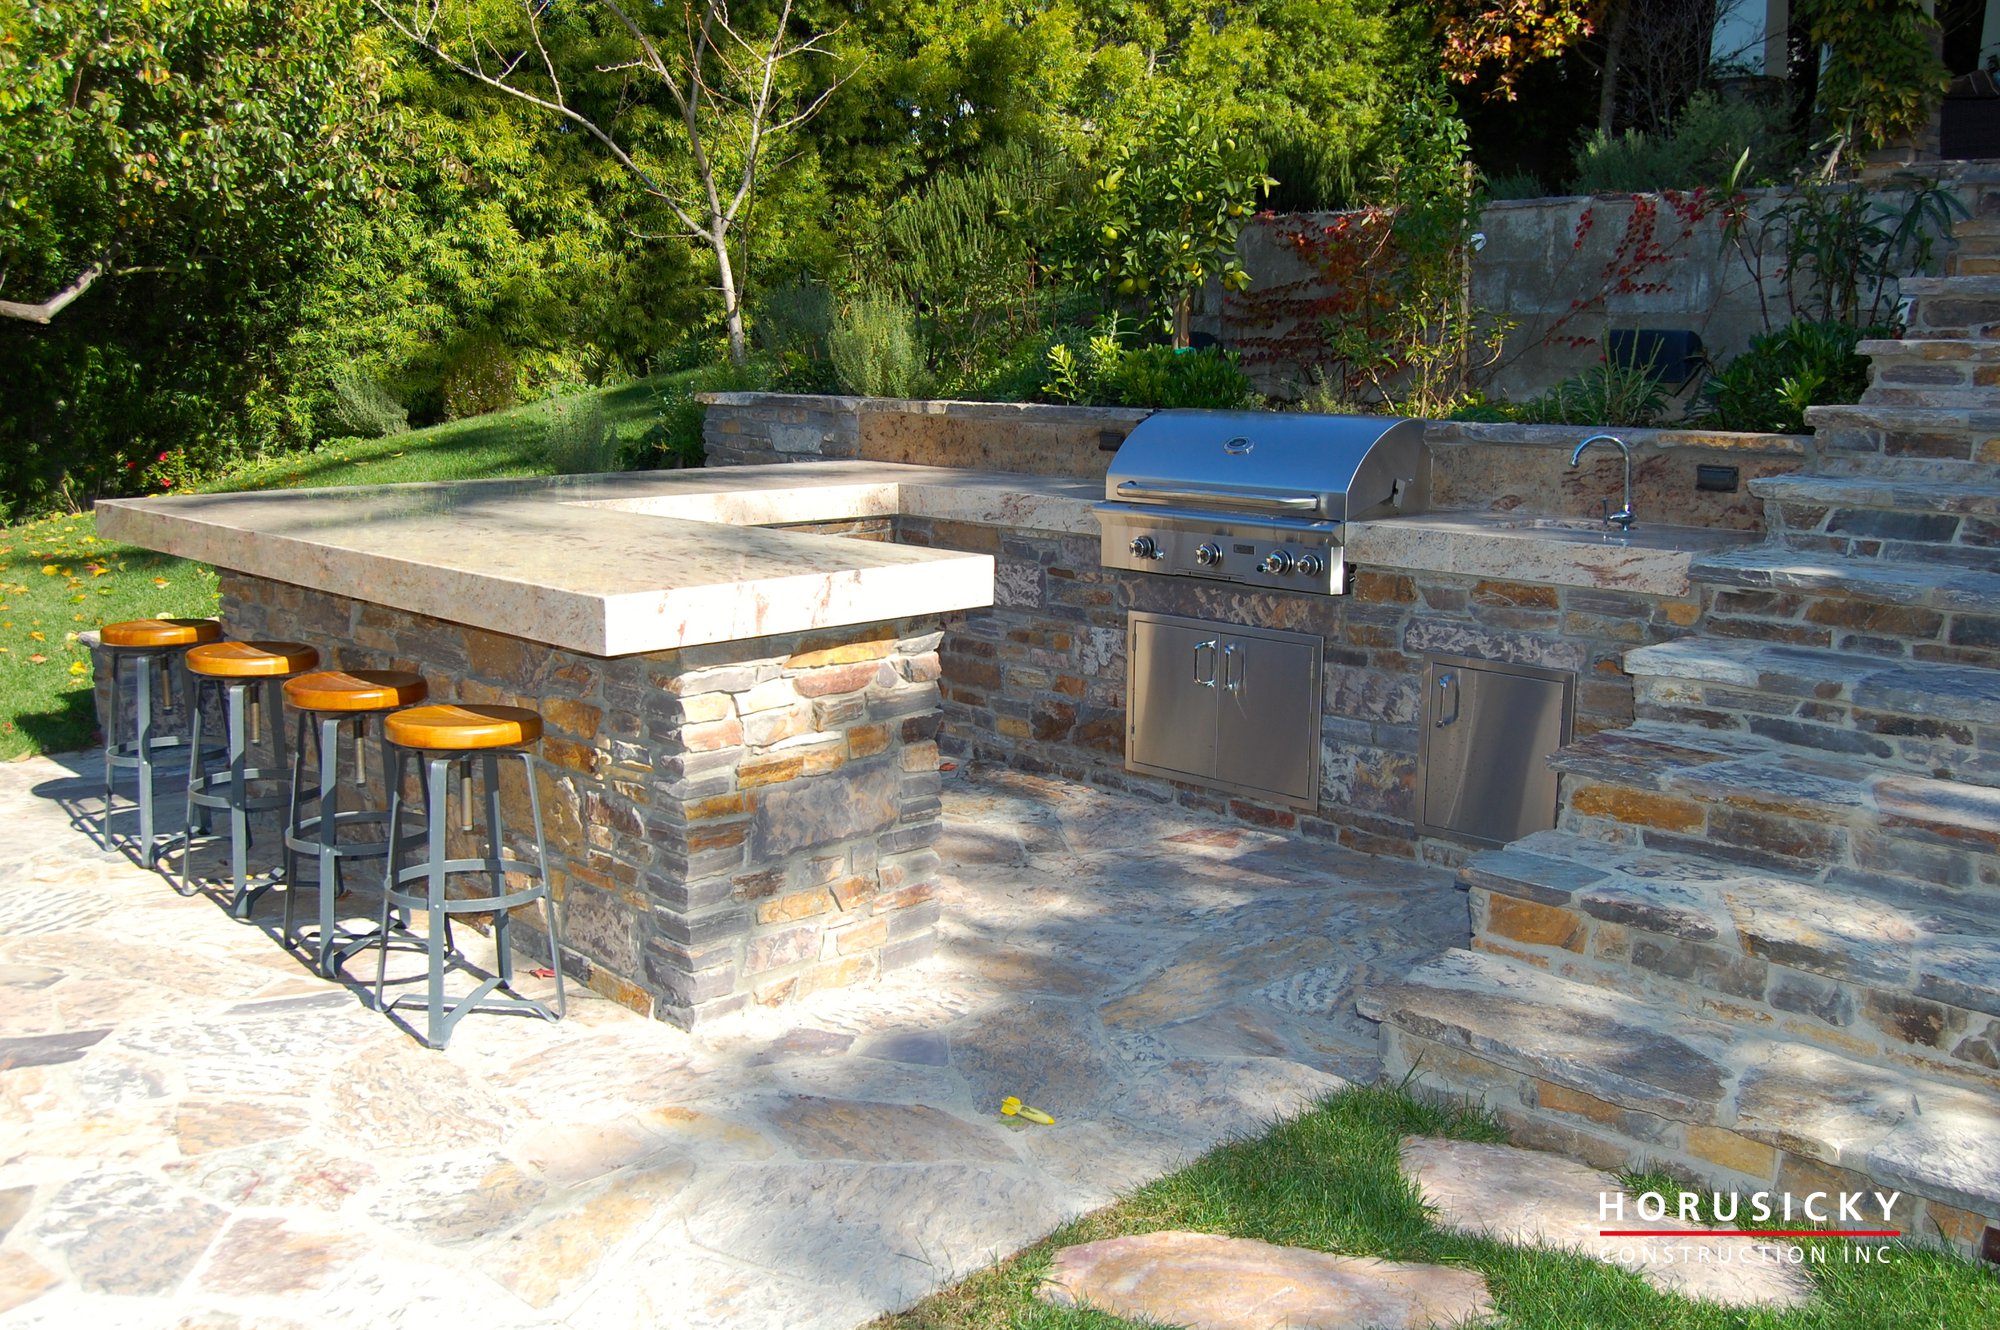 Kitchen-and-bbq-grill-by-horusicky-construction-003